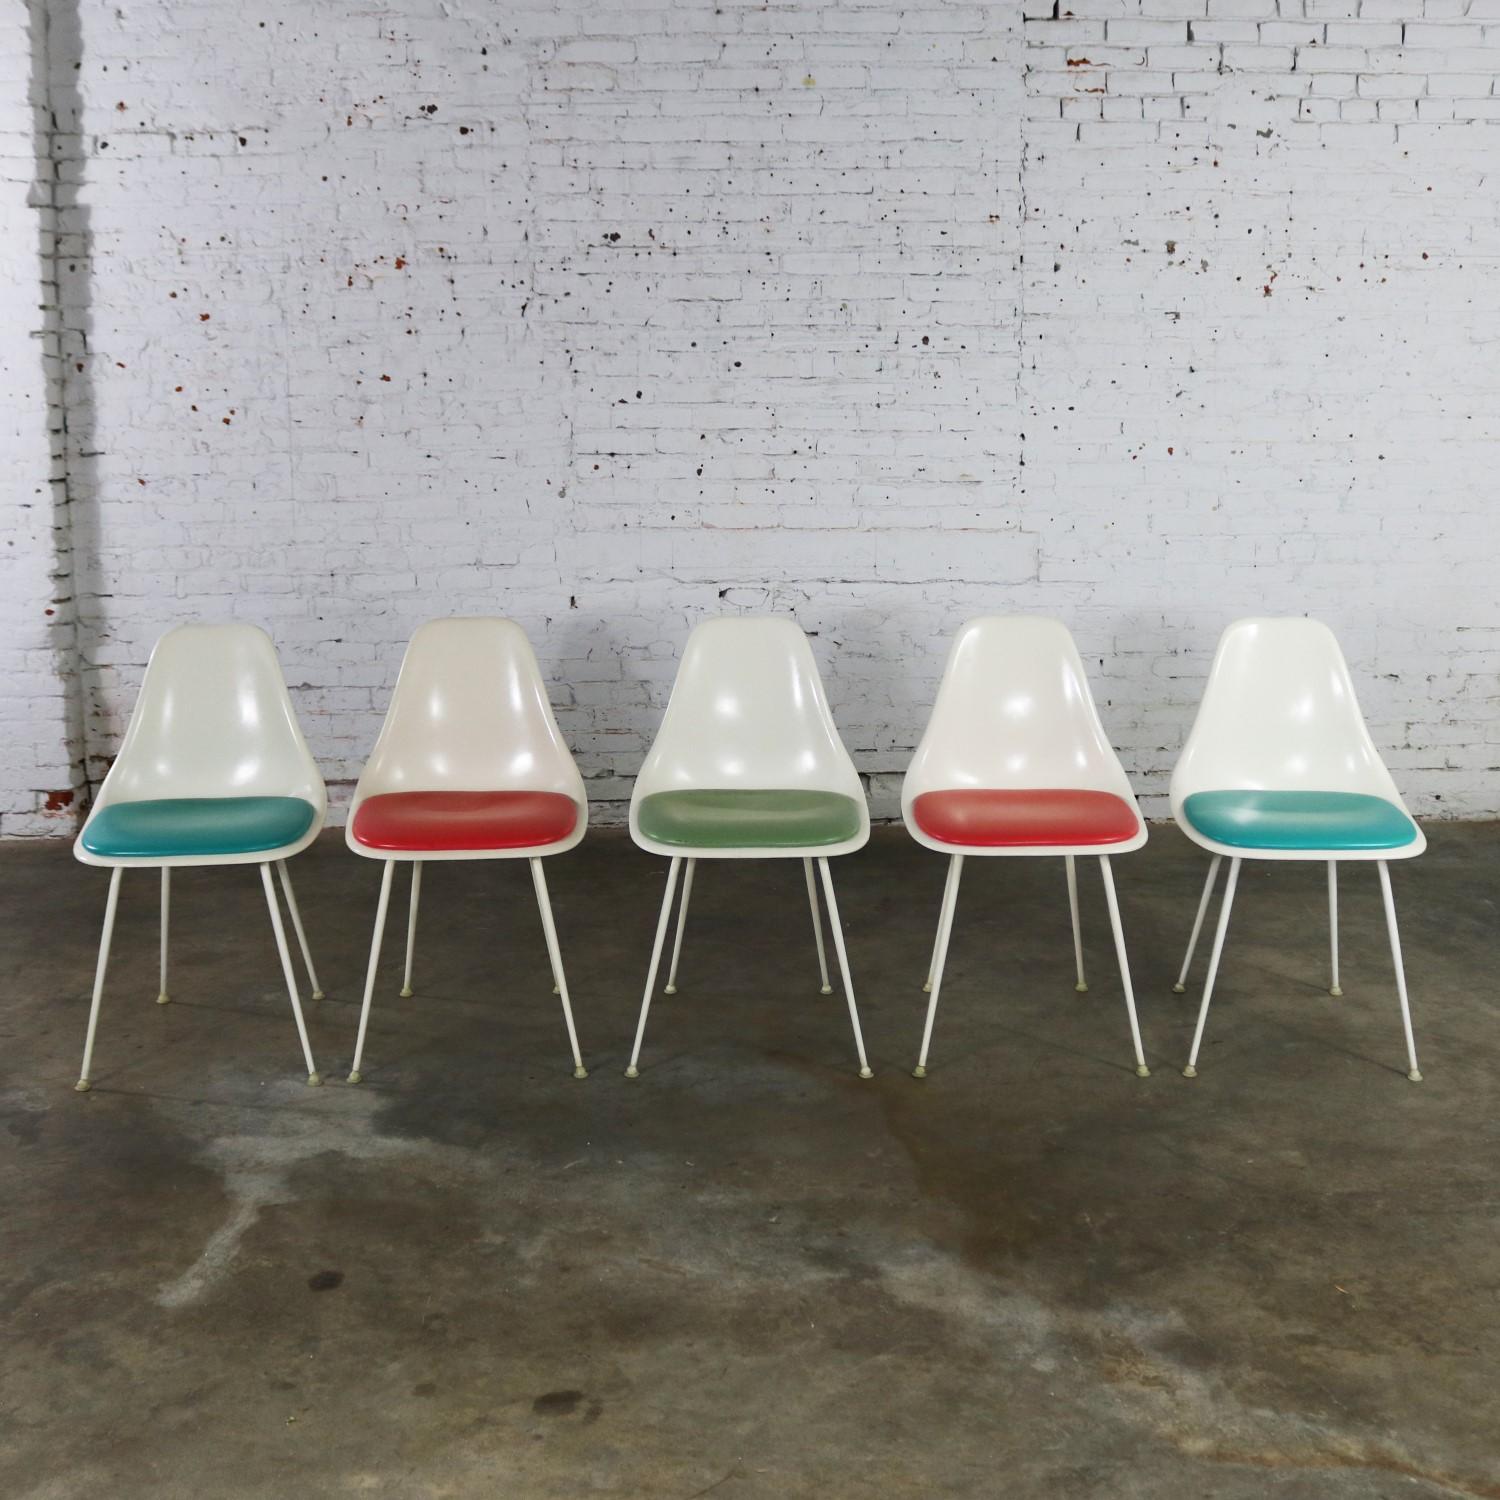 Awesome set of five mid-century modern Burke #103 fiberglass shell side chairs with multicolored vinyl padded seats in turquoise, coral and green. They are in wonderful vintage condition apart from one turquoise chair which has a cut in the original